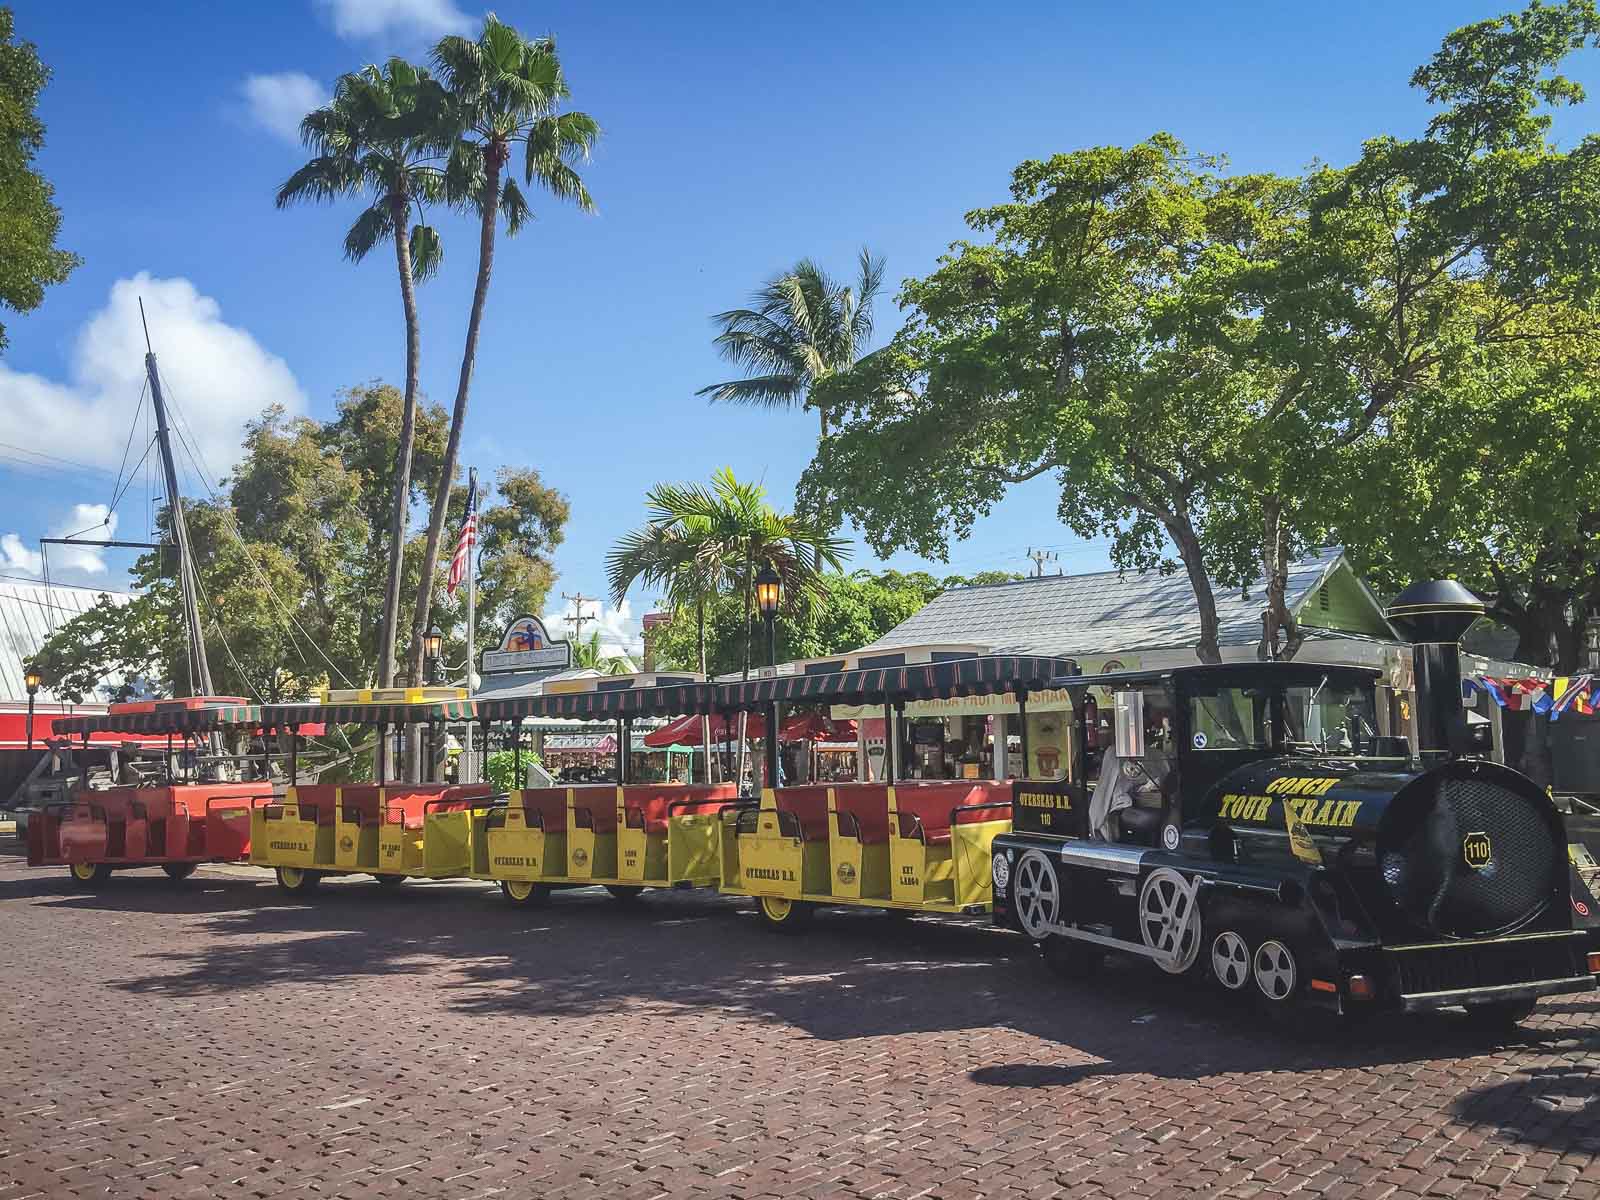 Ride the Conch Train in Key West Florida